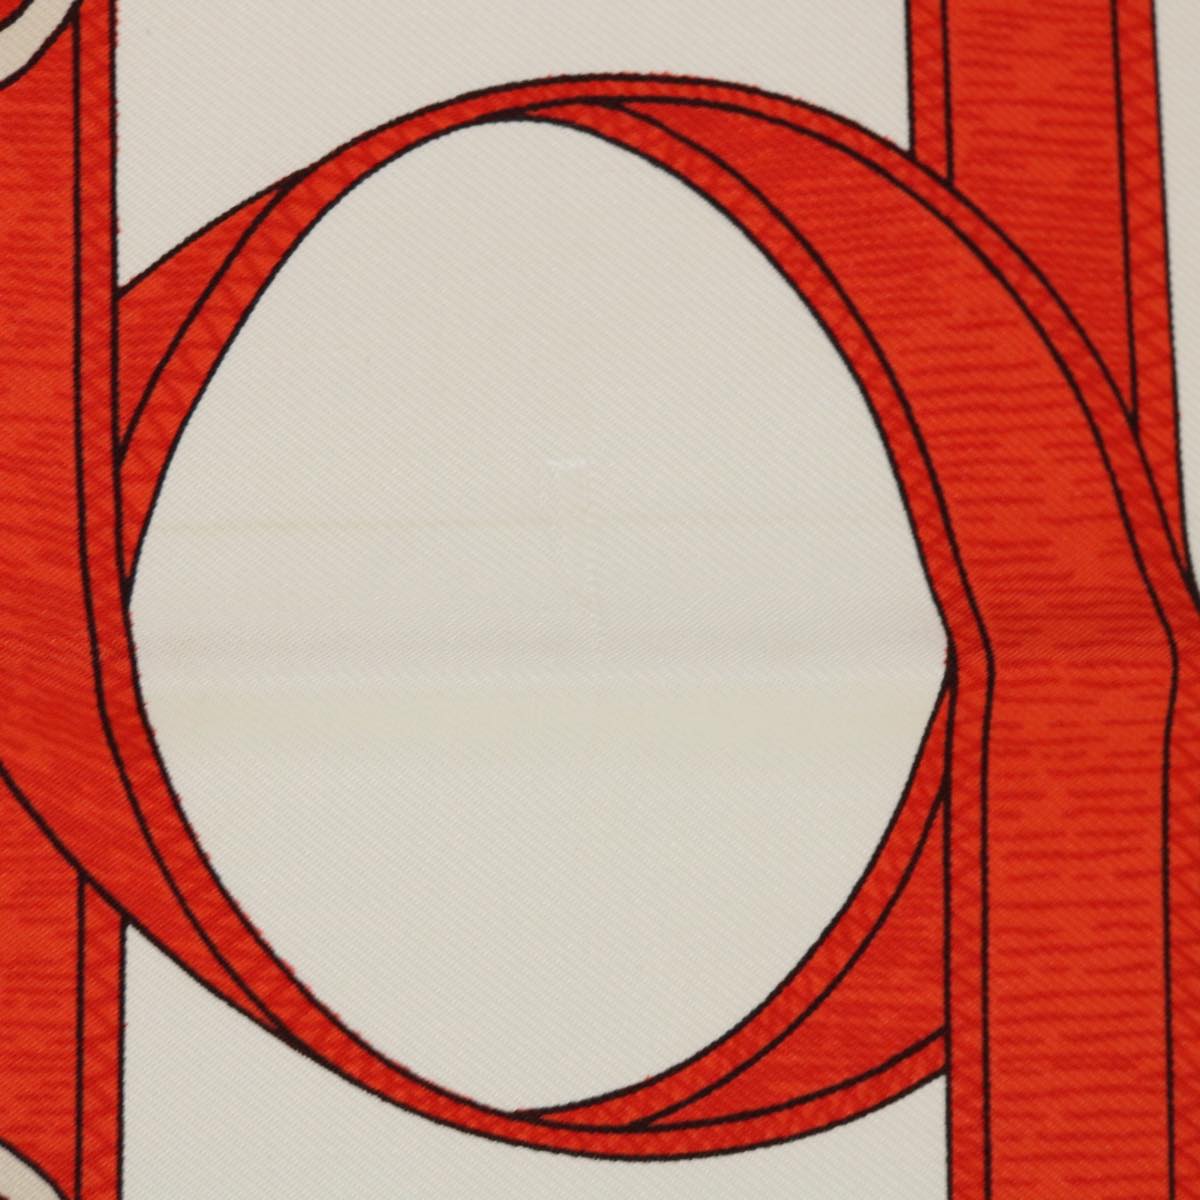 HERMES Carre 90 Eperon d'or Scarf Silk White Red gray Auth bs7315